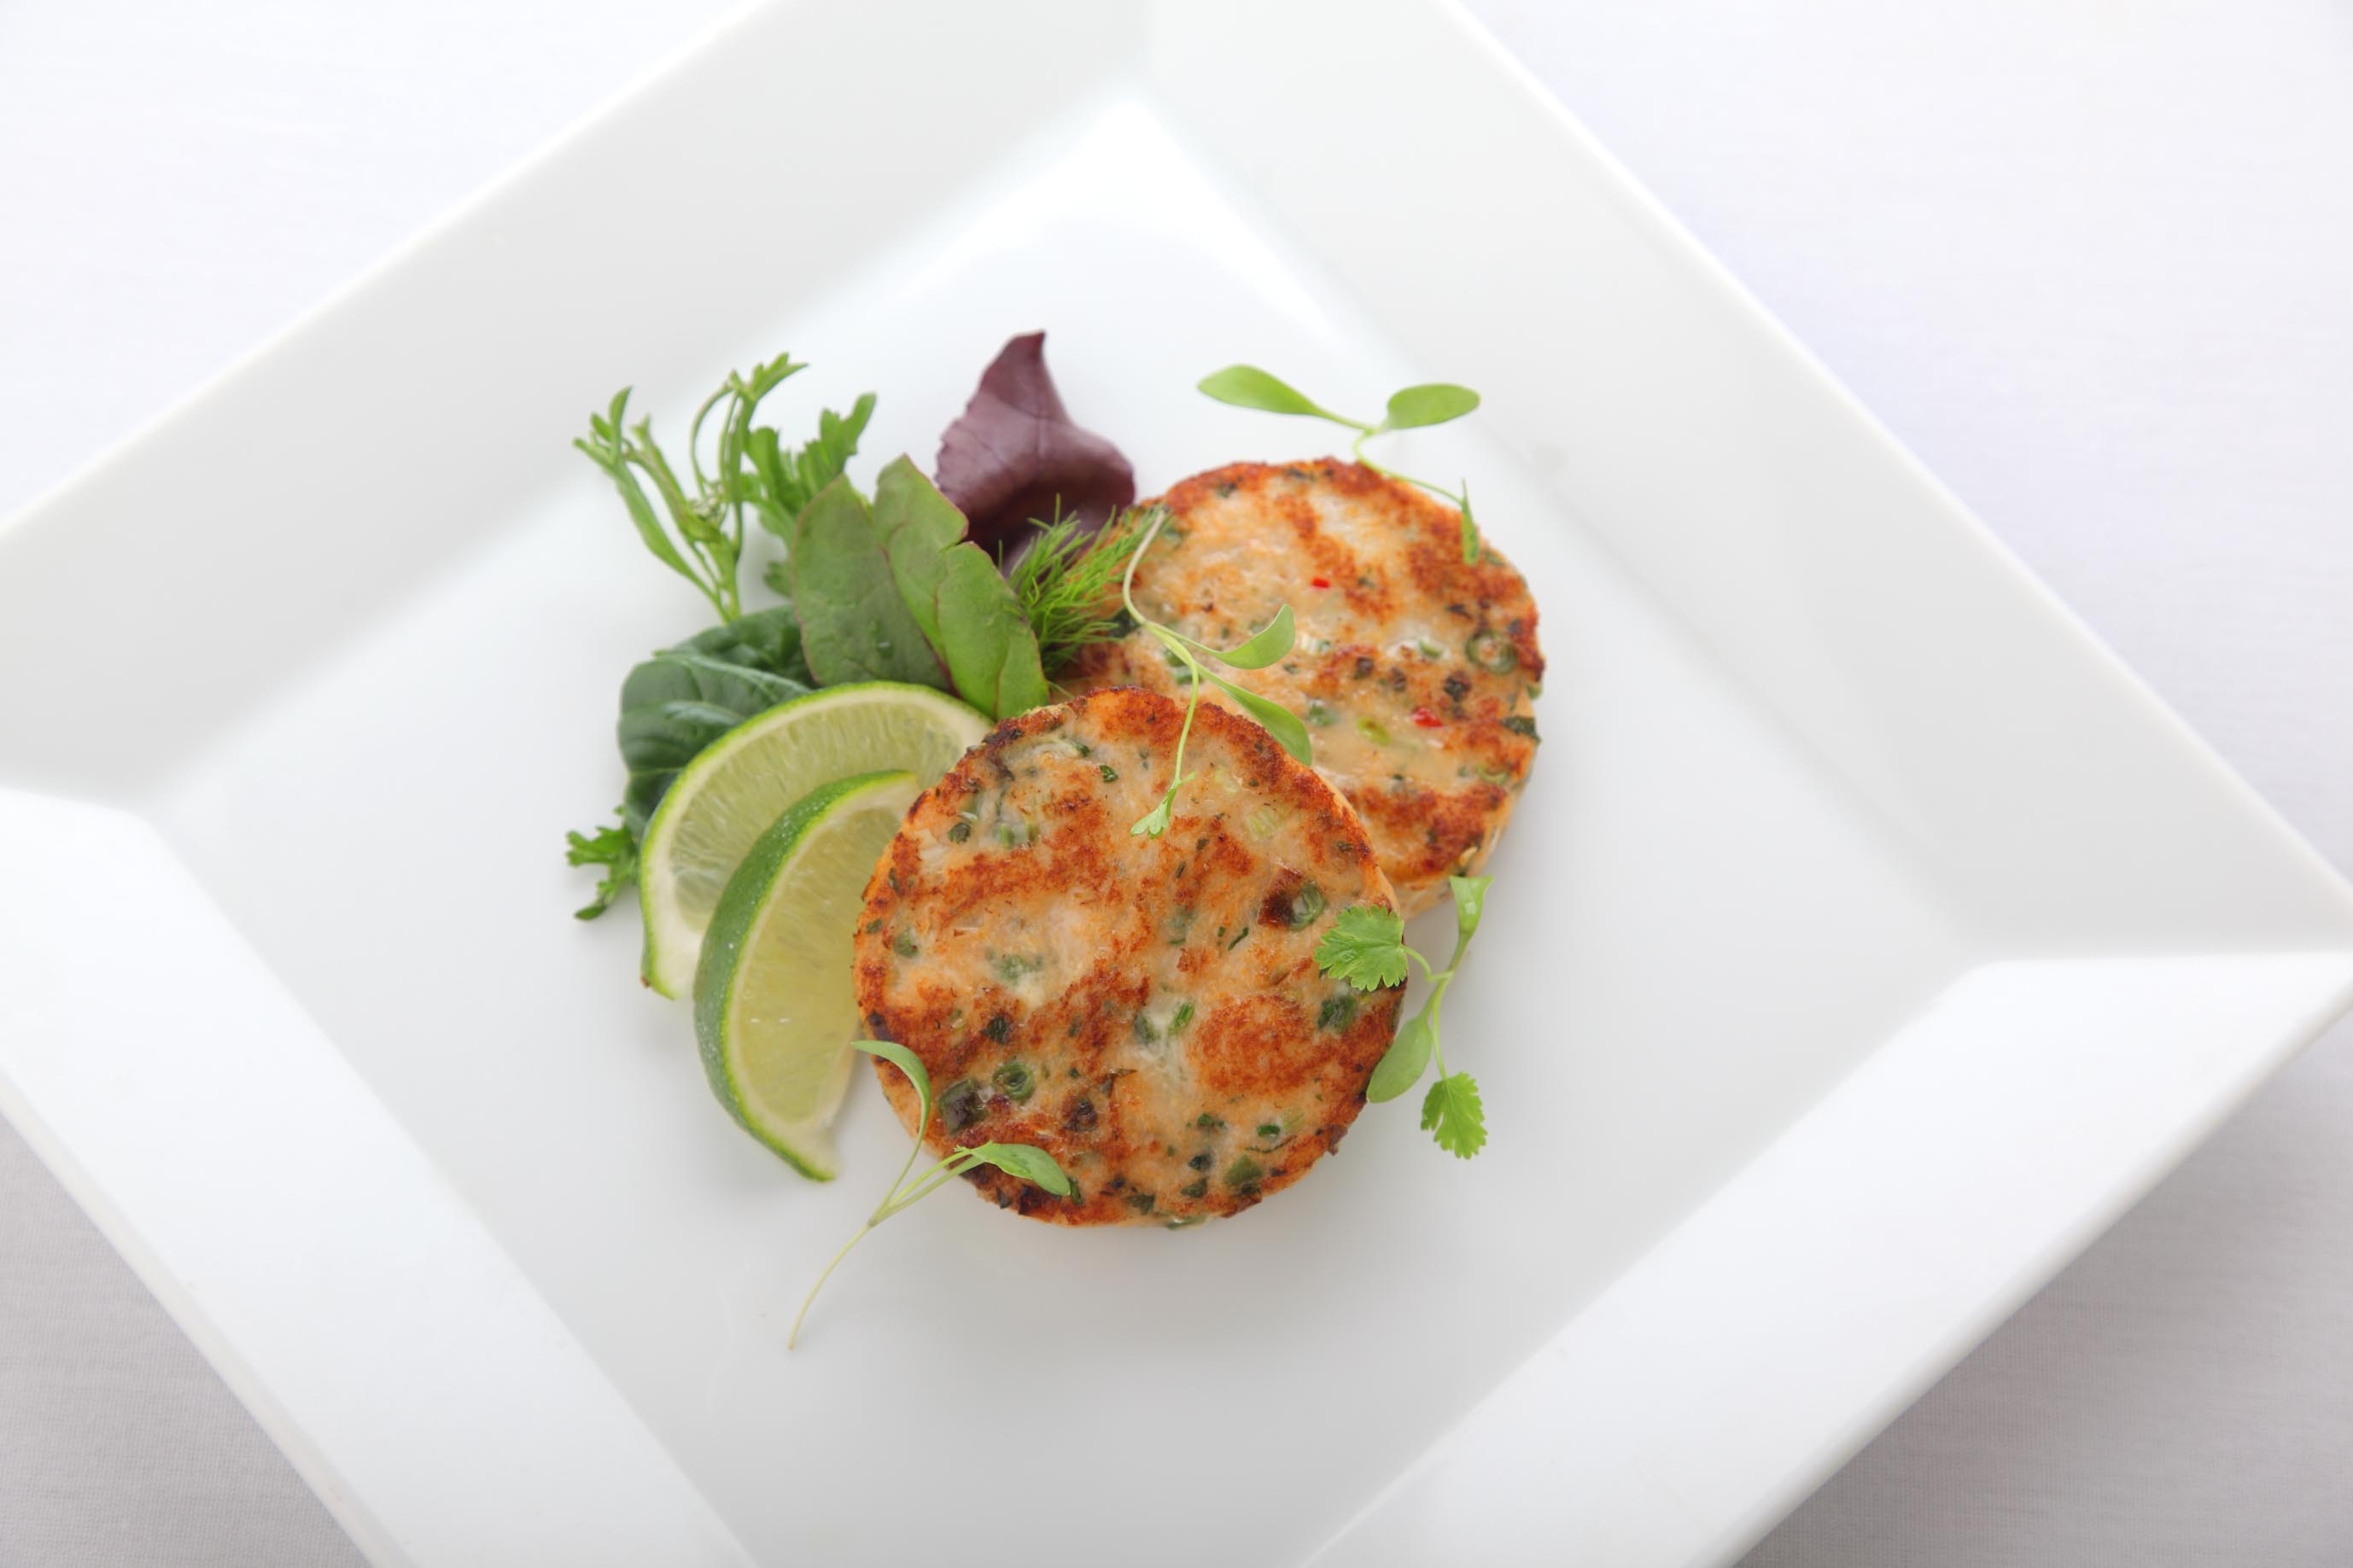 FISH CAKES MADE FROM TINNED FISH